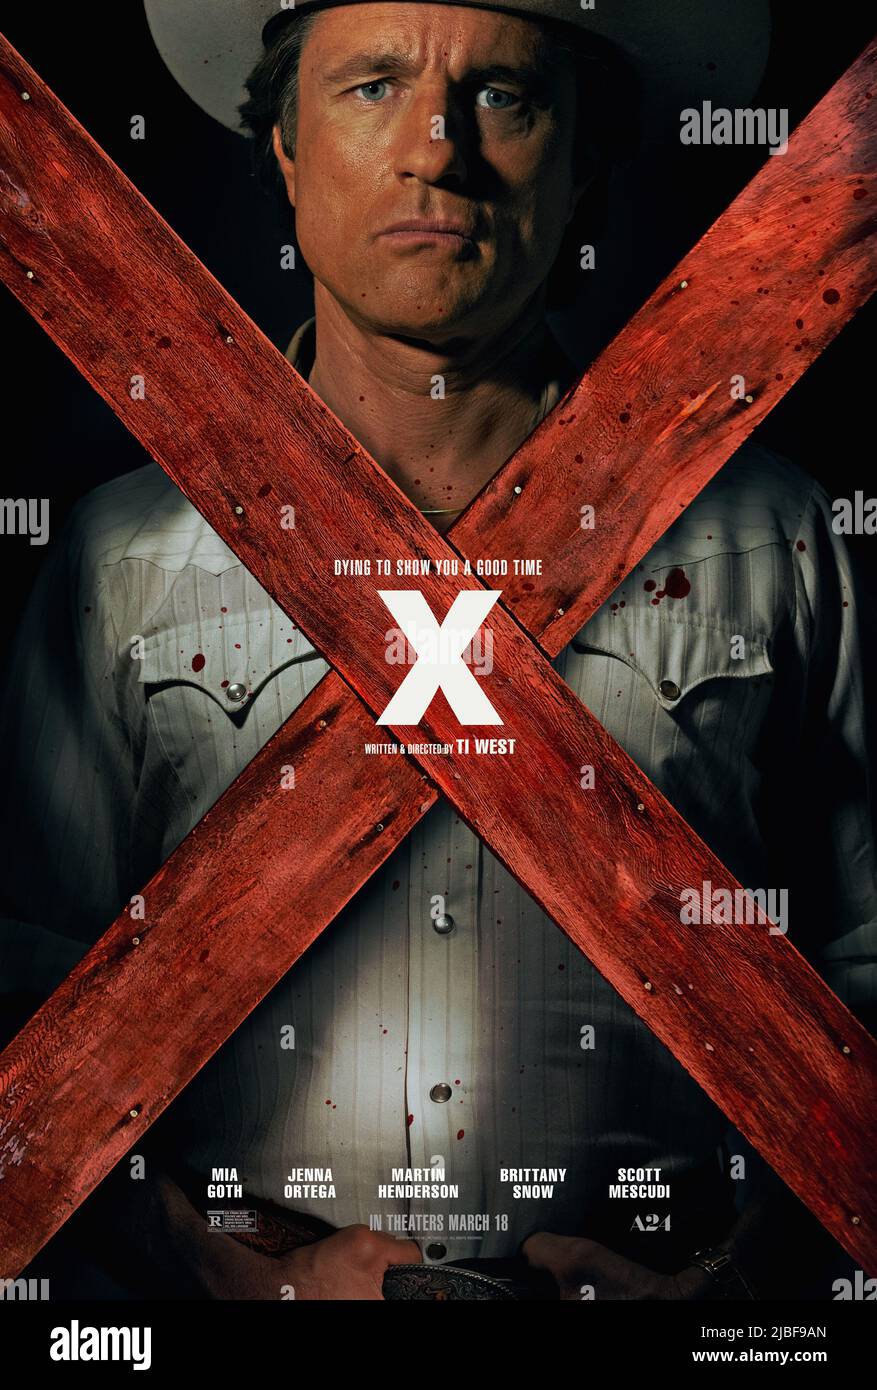 X - Official Trailer  X - Official Trailer In Theatres March 18th